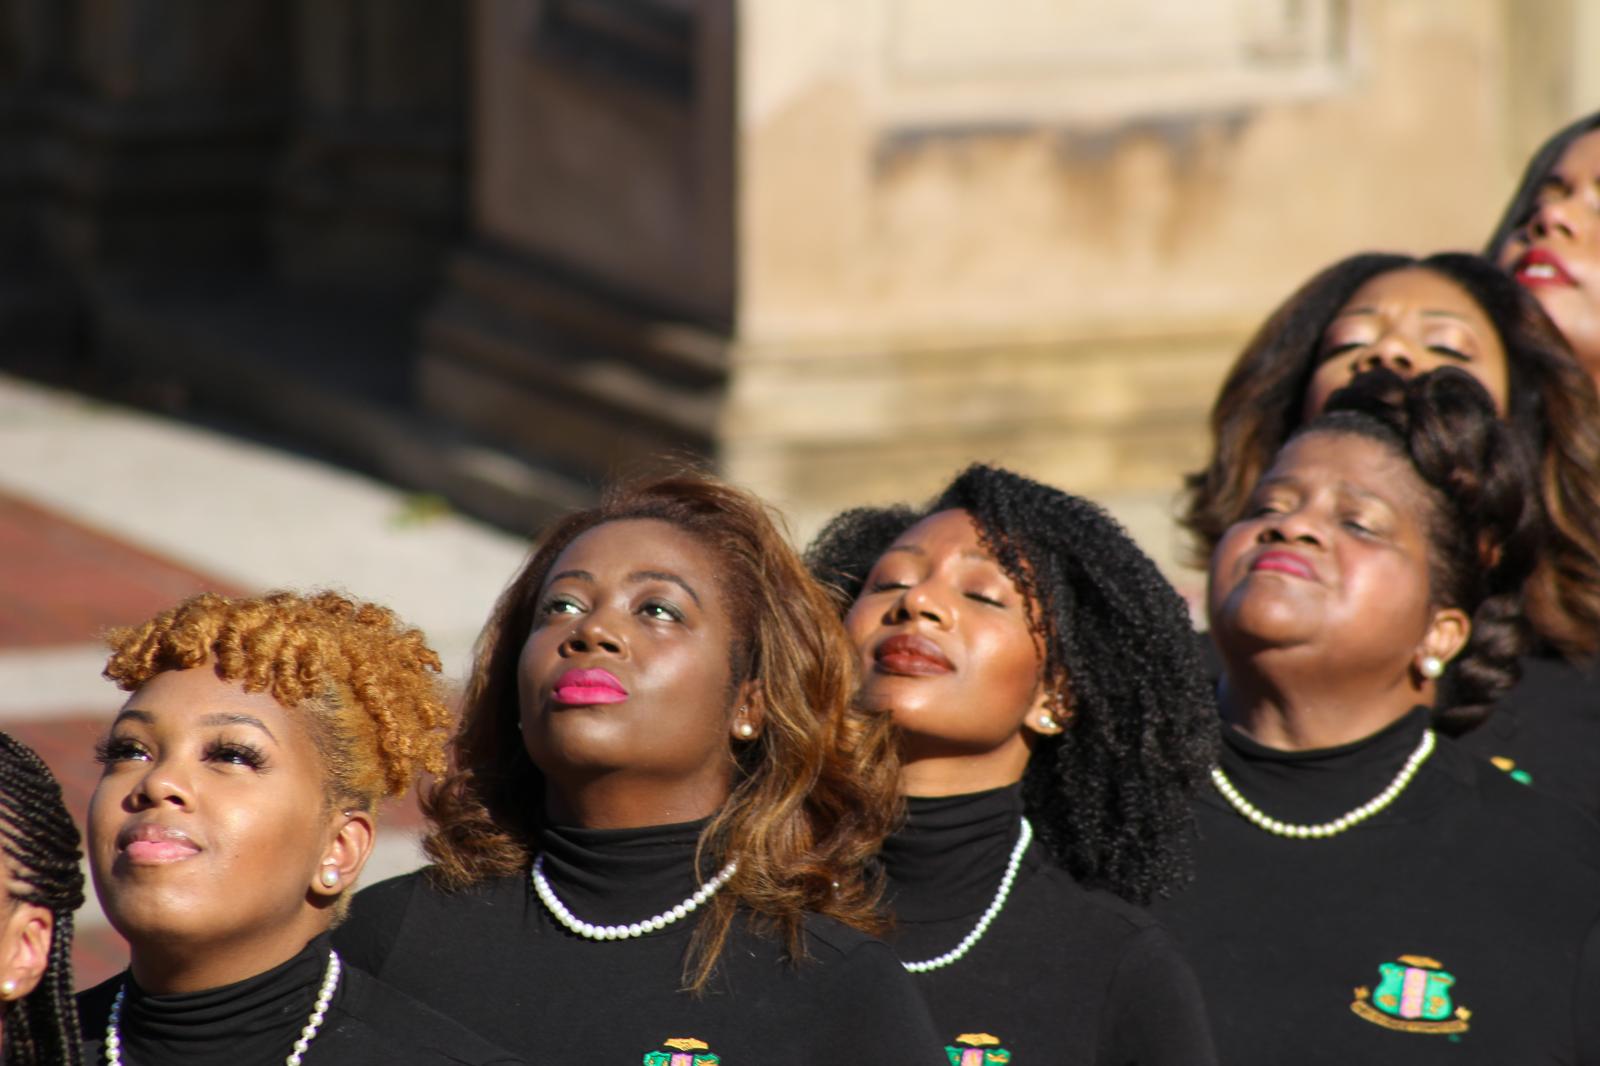 The sorors or sisters of AKA taking in the sun on a November day